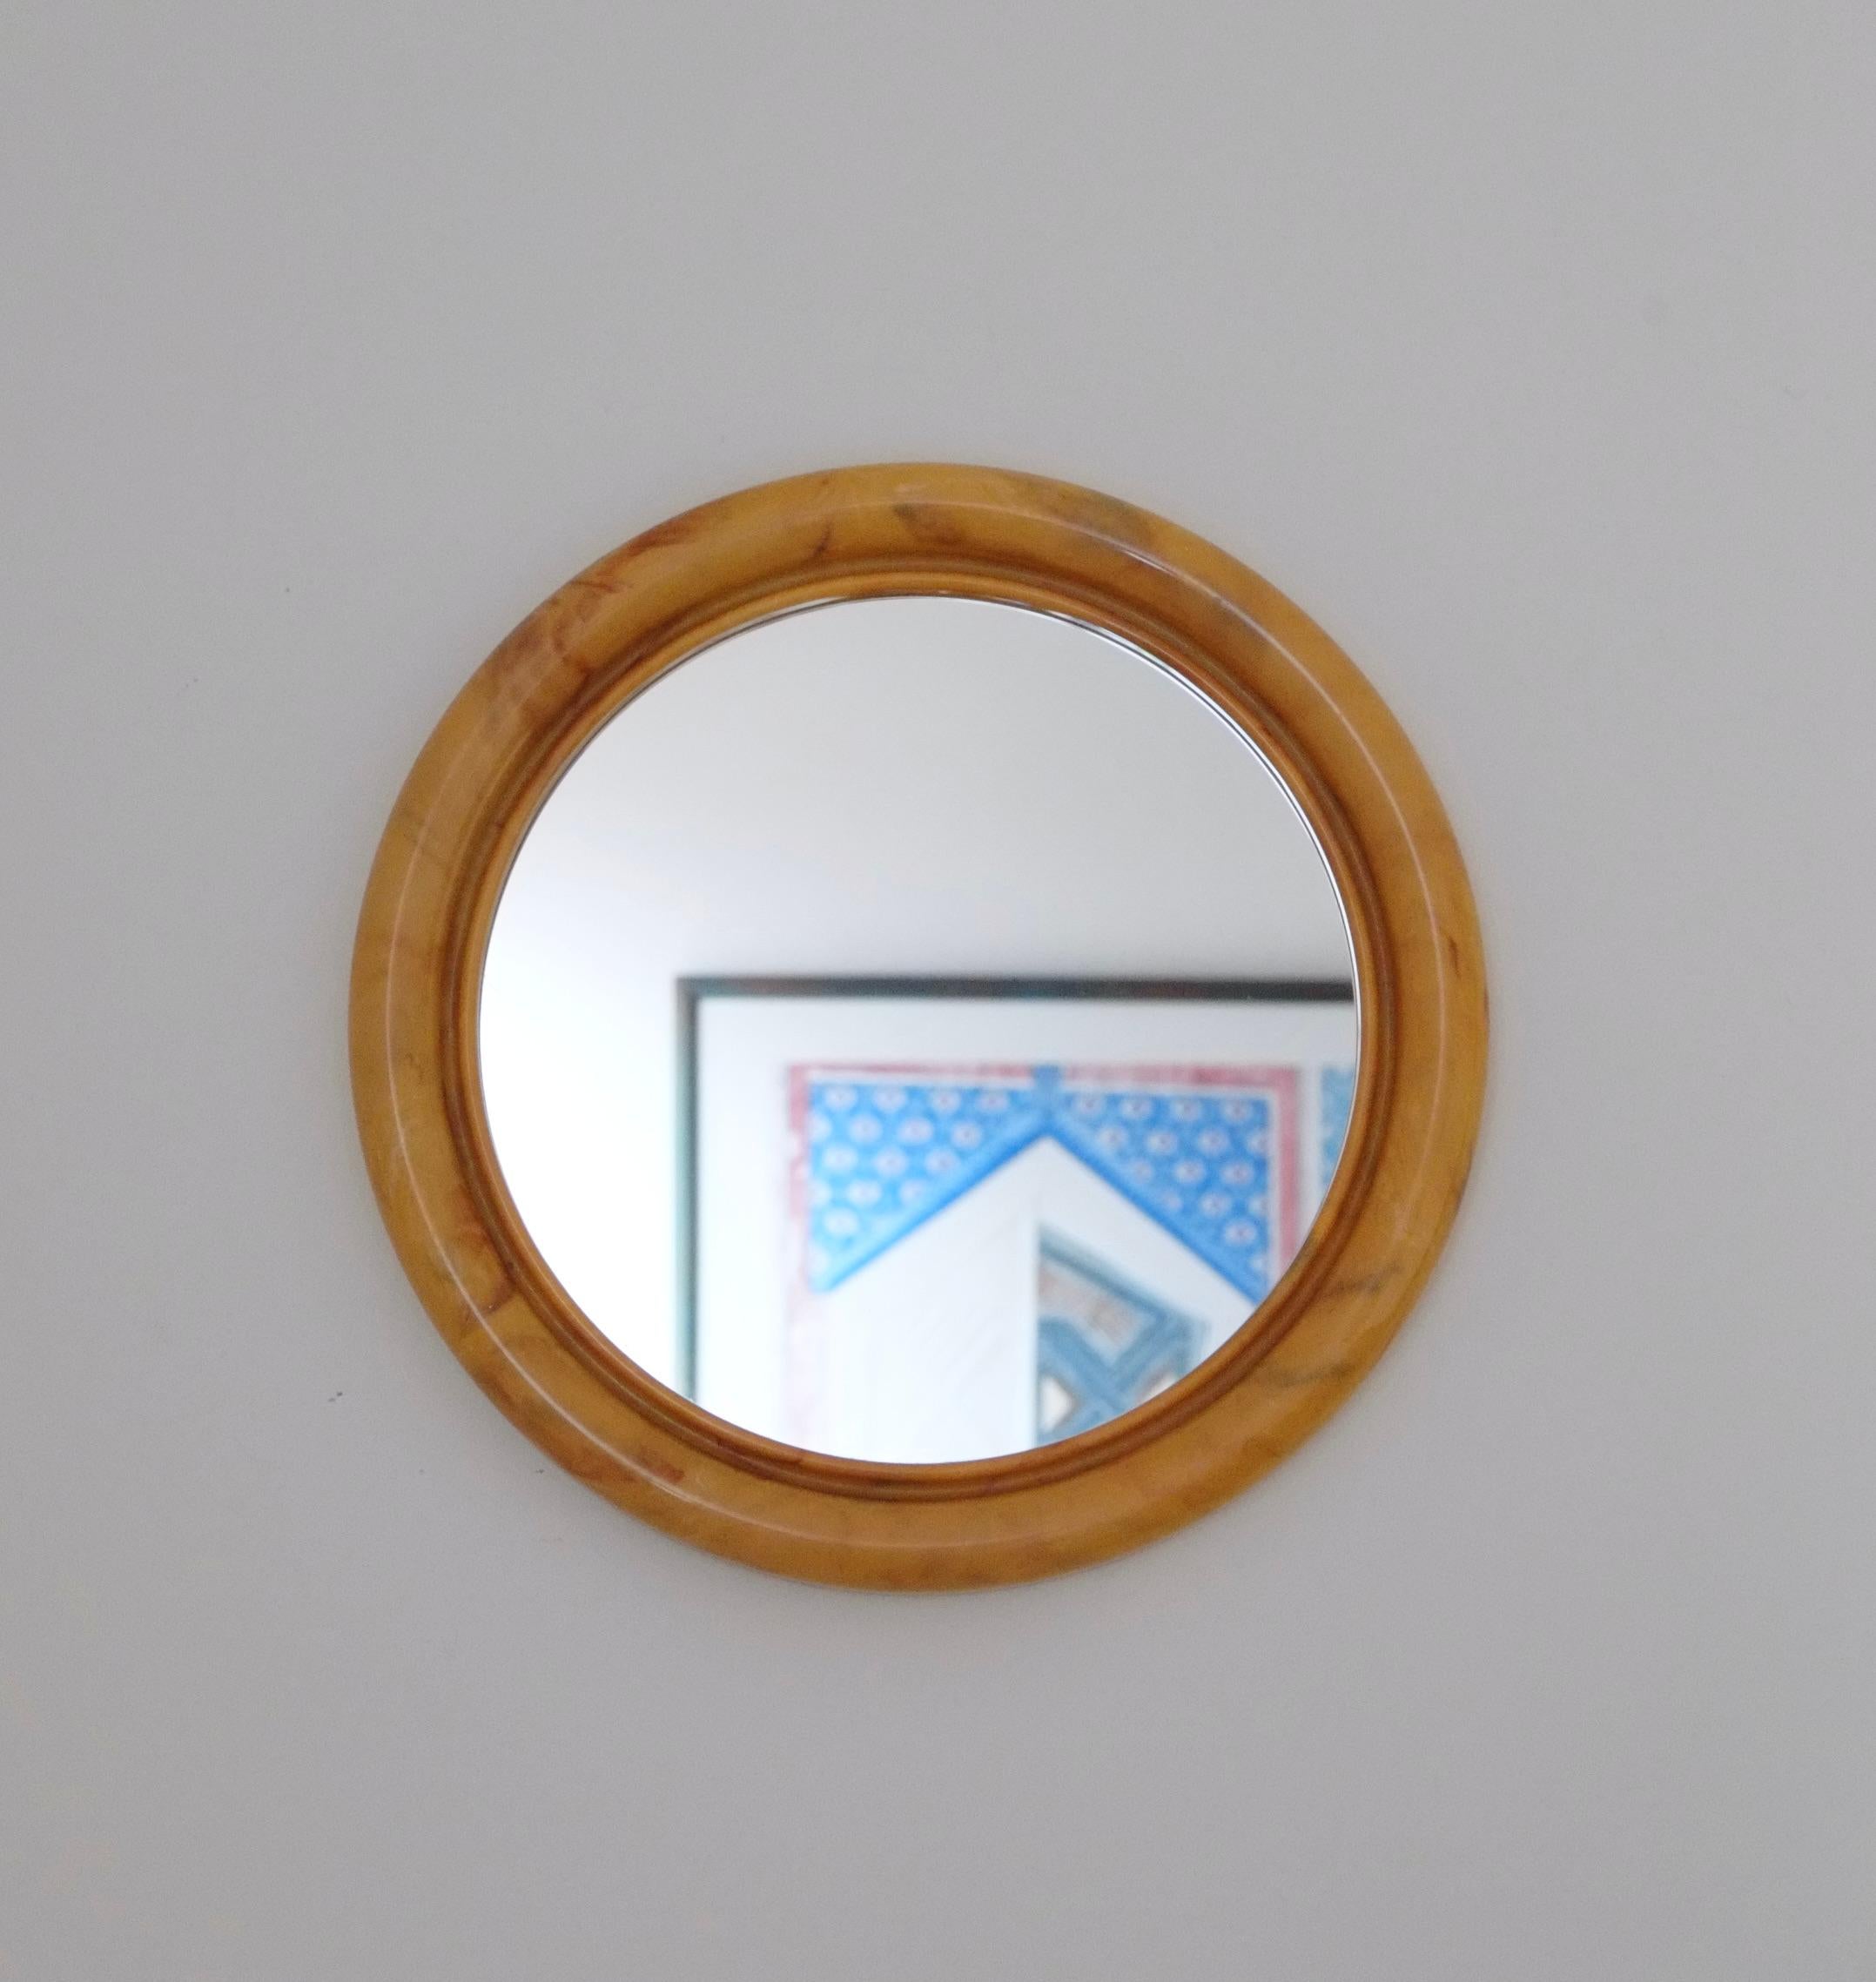 Beautiful mid-century modern round bathroom mirror. This 60's vintage bathroom mirror has a chunky moulded plastic frame with the most beautiful butterscotch marbled colour. Black backing with tiny made in England label.
The mirror and frame are in